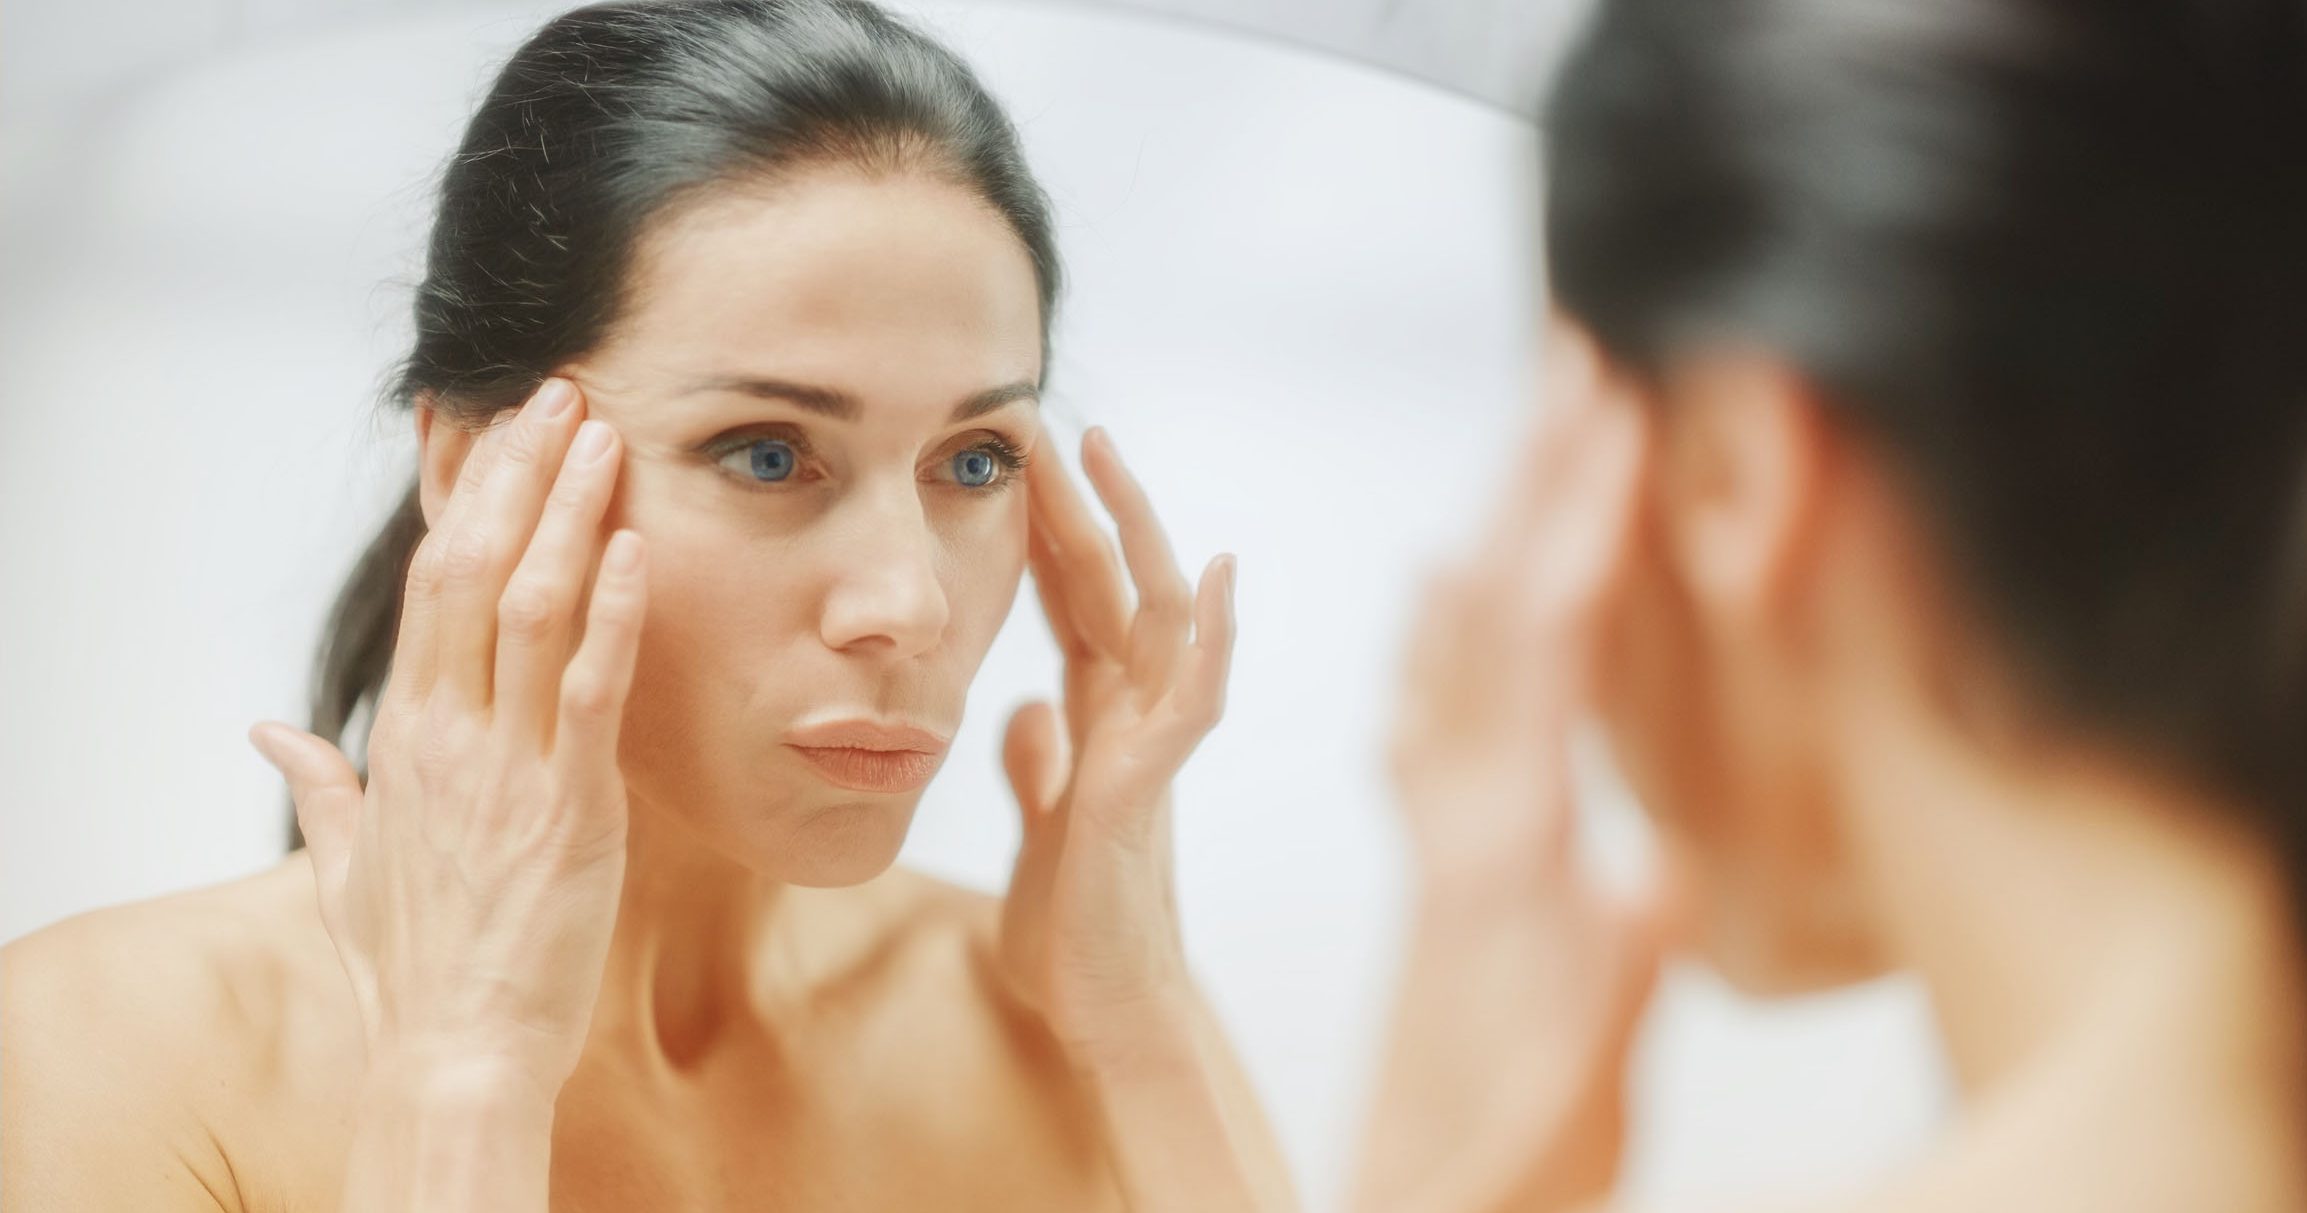 A woman in her 40s looking at herself in a mirror and thinking about facelift surgery.